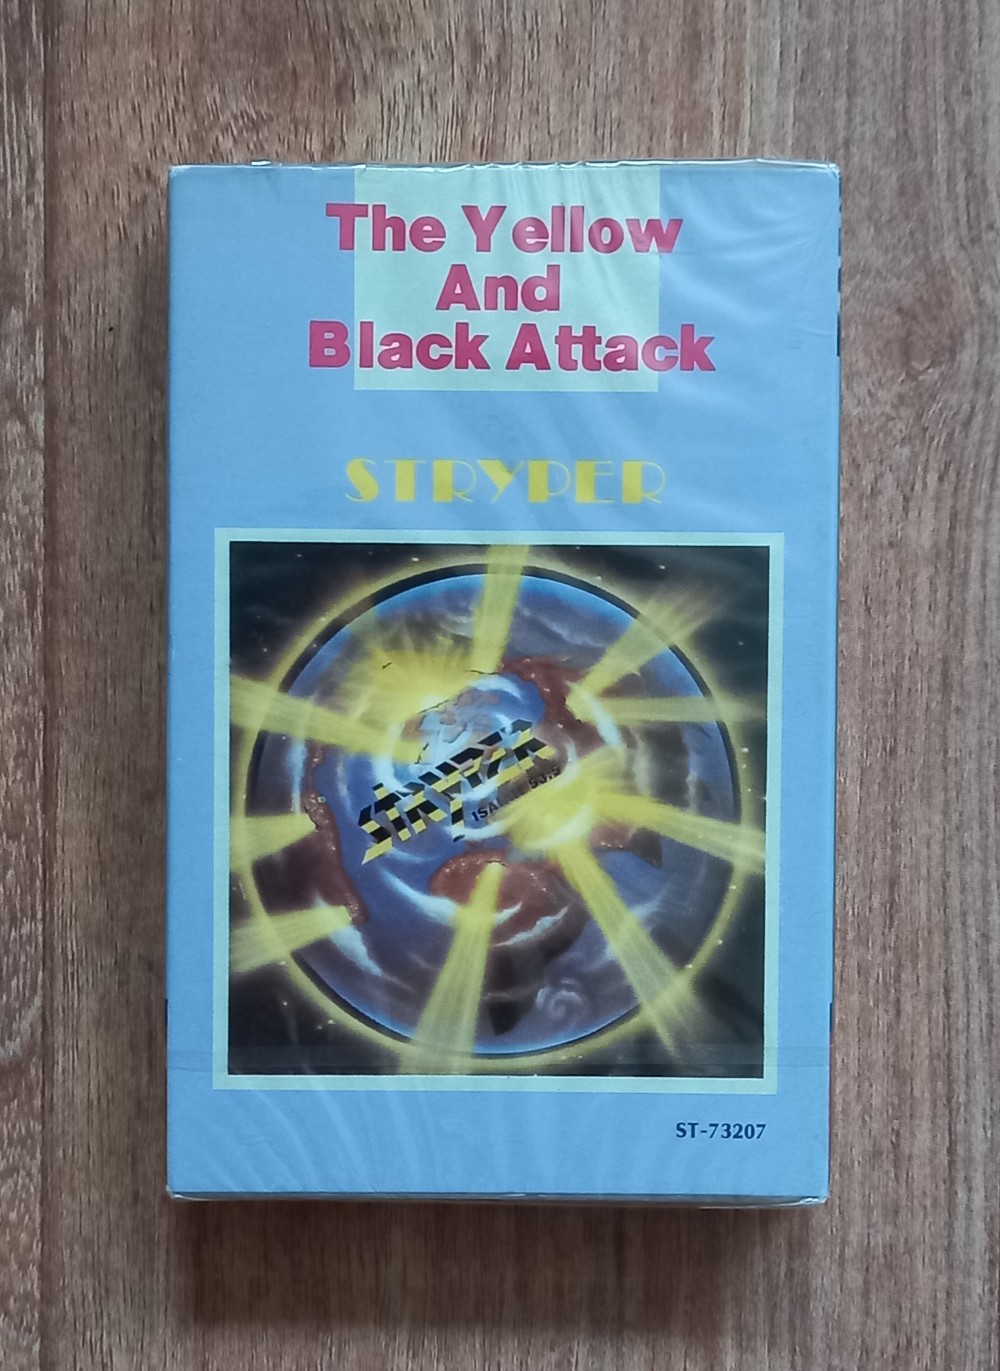 Stryper - The Yellow and Black Attack Cassette Photo | Metal Kingdom